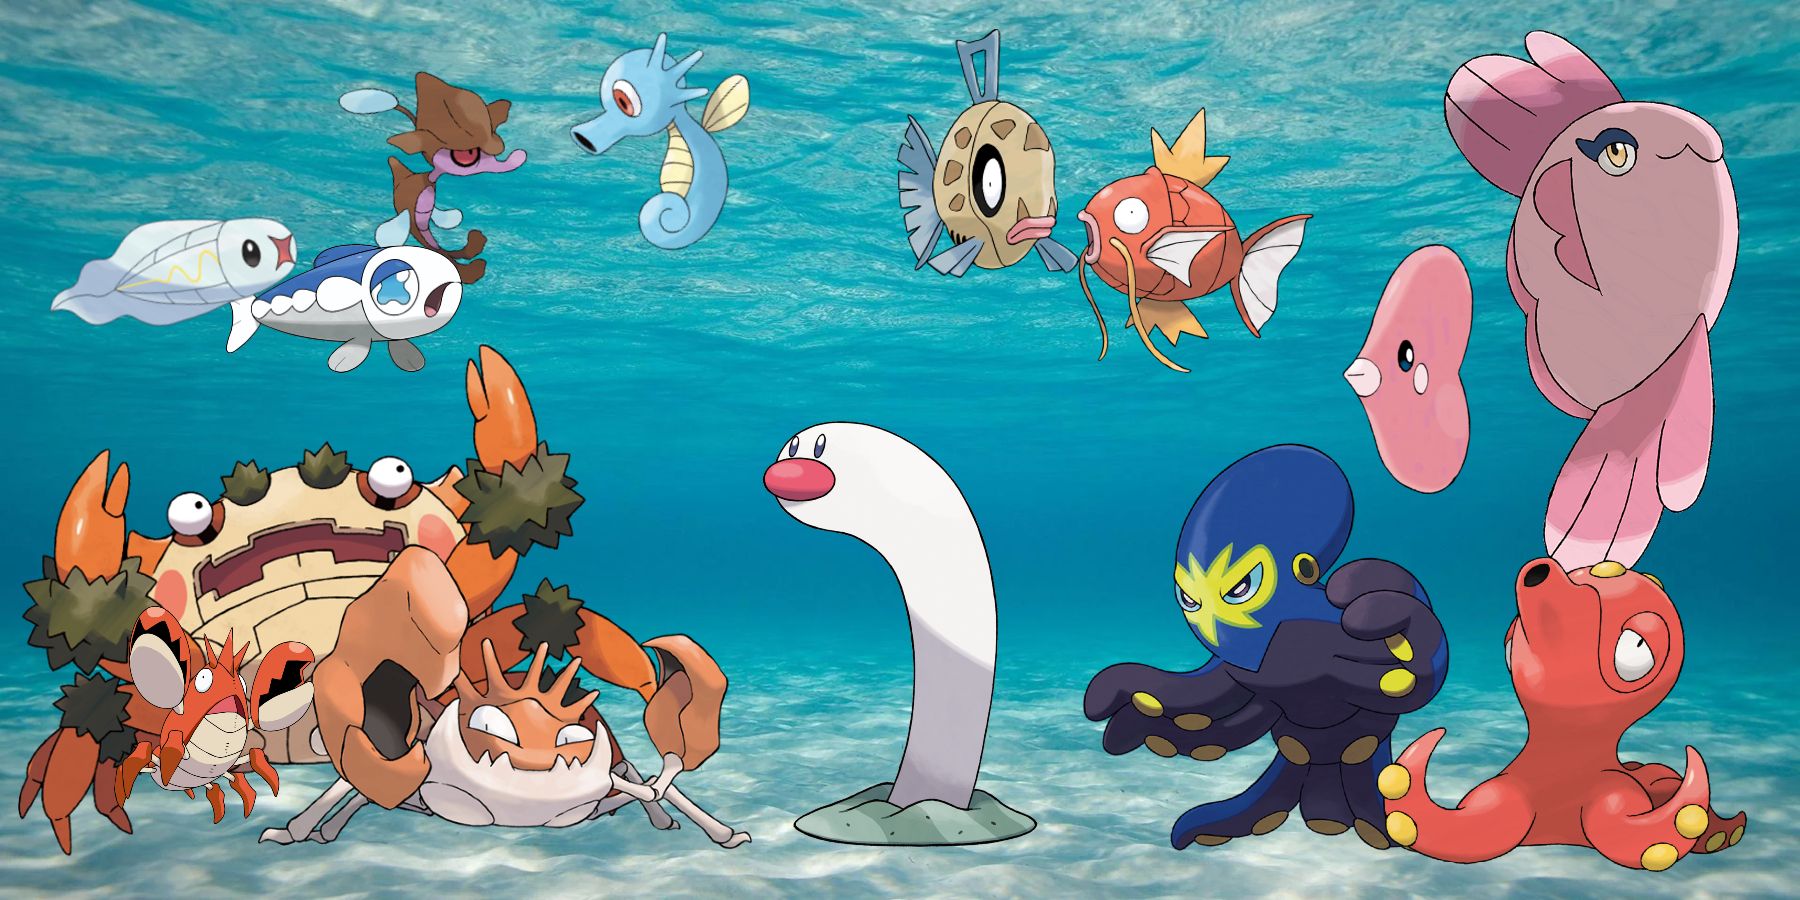 A selection of Pokemon that reflect convergent evolution, including Corphish, Klawf, and Kingler, Tynamo and Wishiwashi, Skrelp and Horsea, Feebas and Magikarp, Luvdisc and Alomomola, and Grapploct and Octillery.